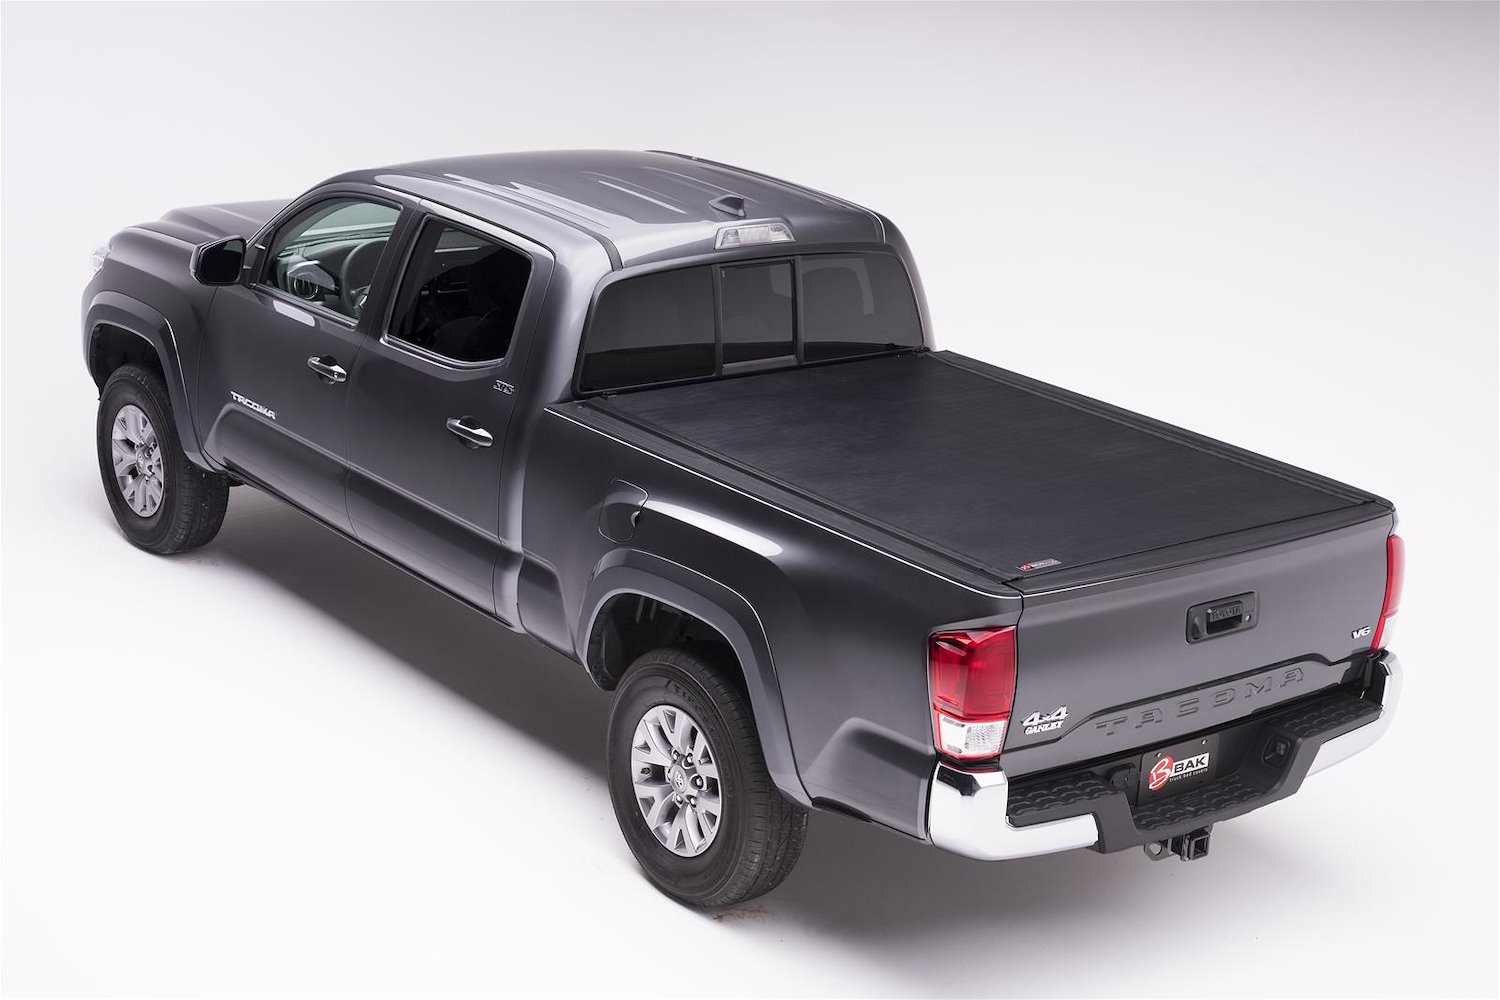 39427 Revolver X2 for Fits Select Toyota Tacoma 6.2 ft. Bed, Roll-Up Hard Cover Style [Black Finish]